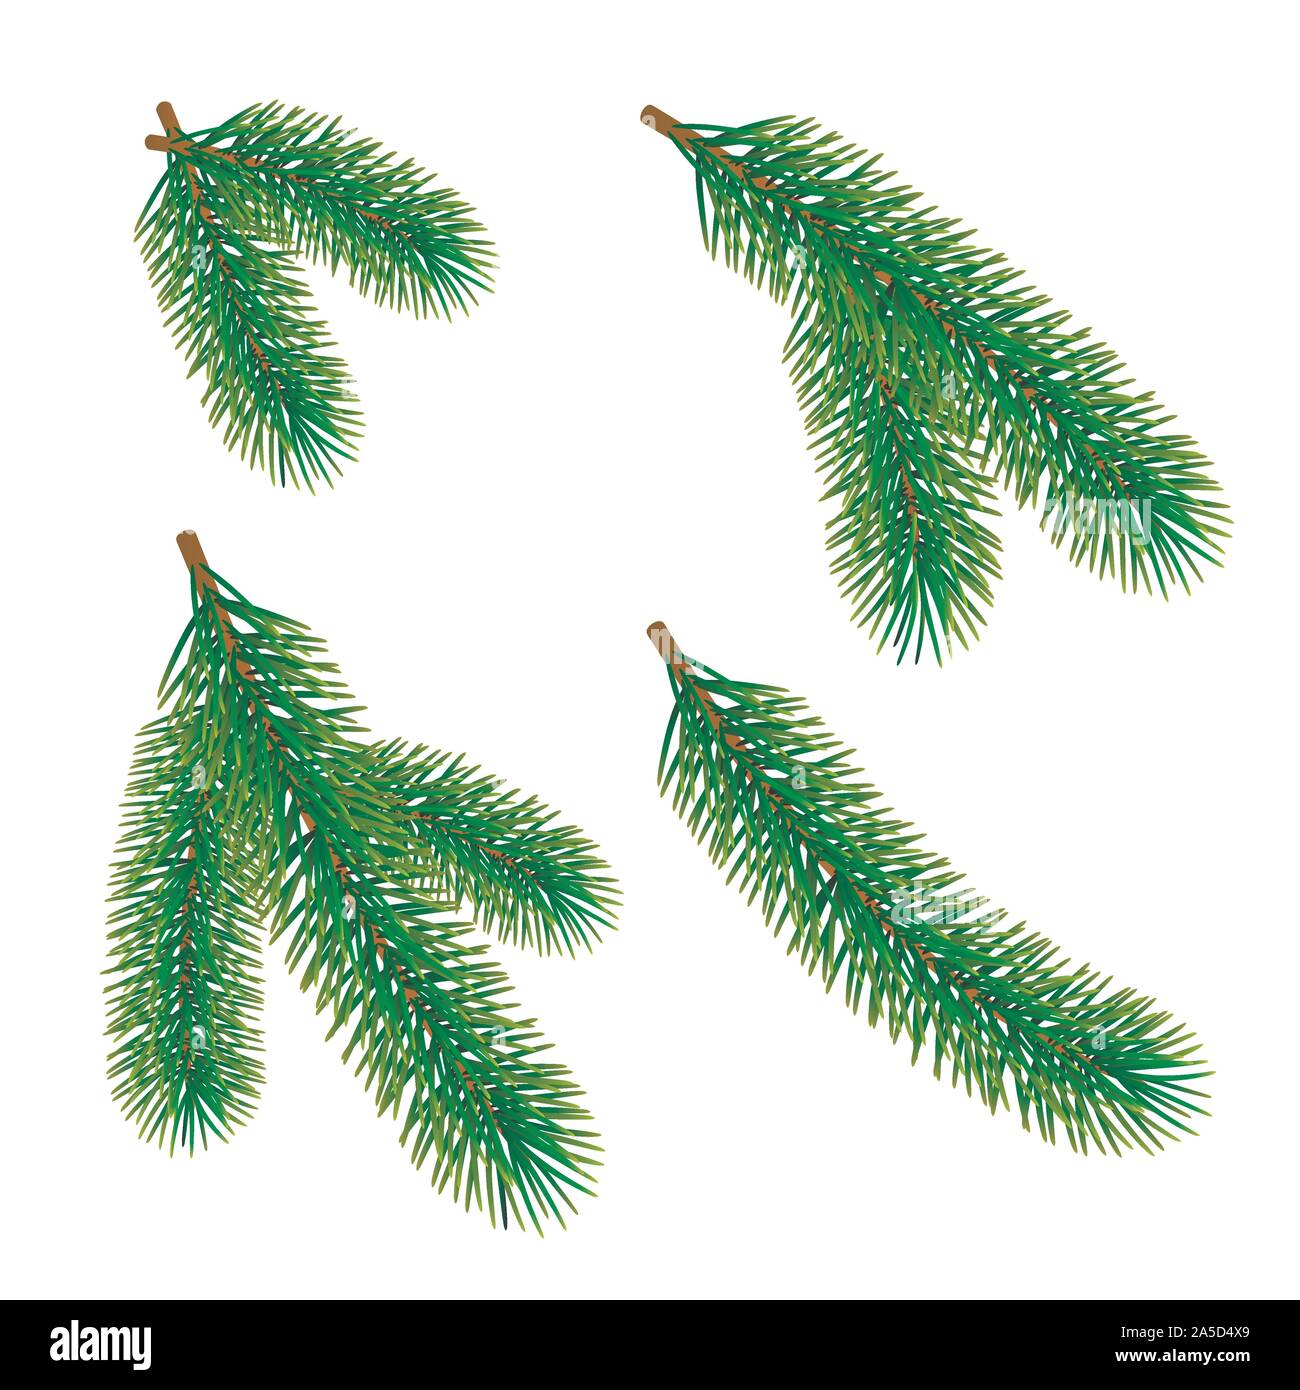 Green fir branch isolated on white background. Traditional Christmas evergreen tree decoration element. Vector Stock Vector